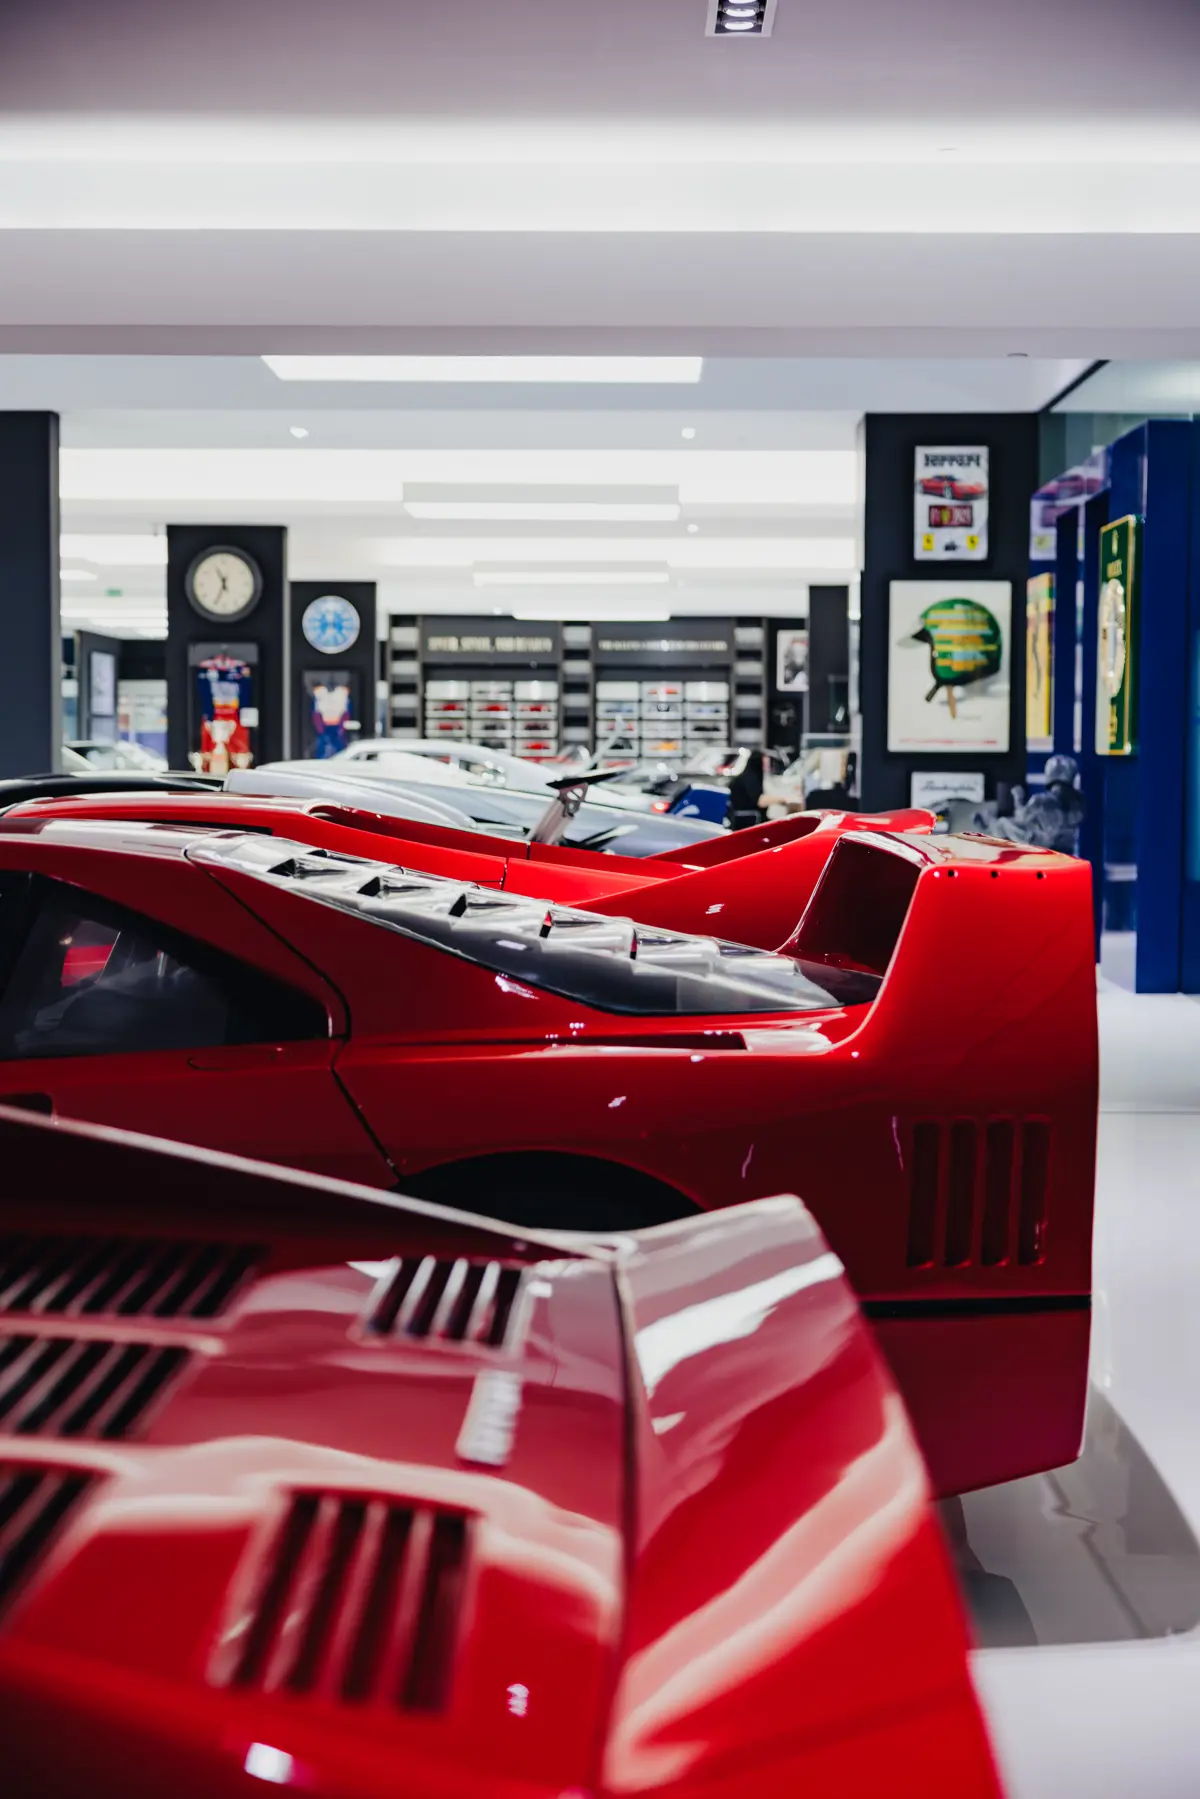 A tight vertical shot looking over the rear ends of three of the Dare to Dream Collection’s Ferraris, a Bugatti Veyron, Maserati MC12, Porsche 911… and a faint glimpse of model cars in a case at the rear of the shot on a wall. Some Porsche and other posters can be seen, along with a couple of racing suits and clocks.